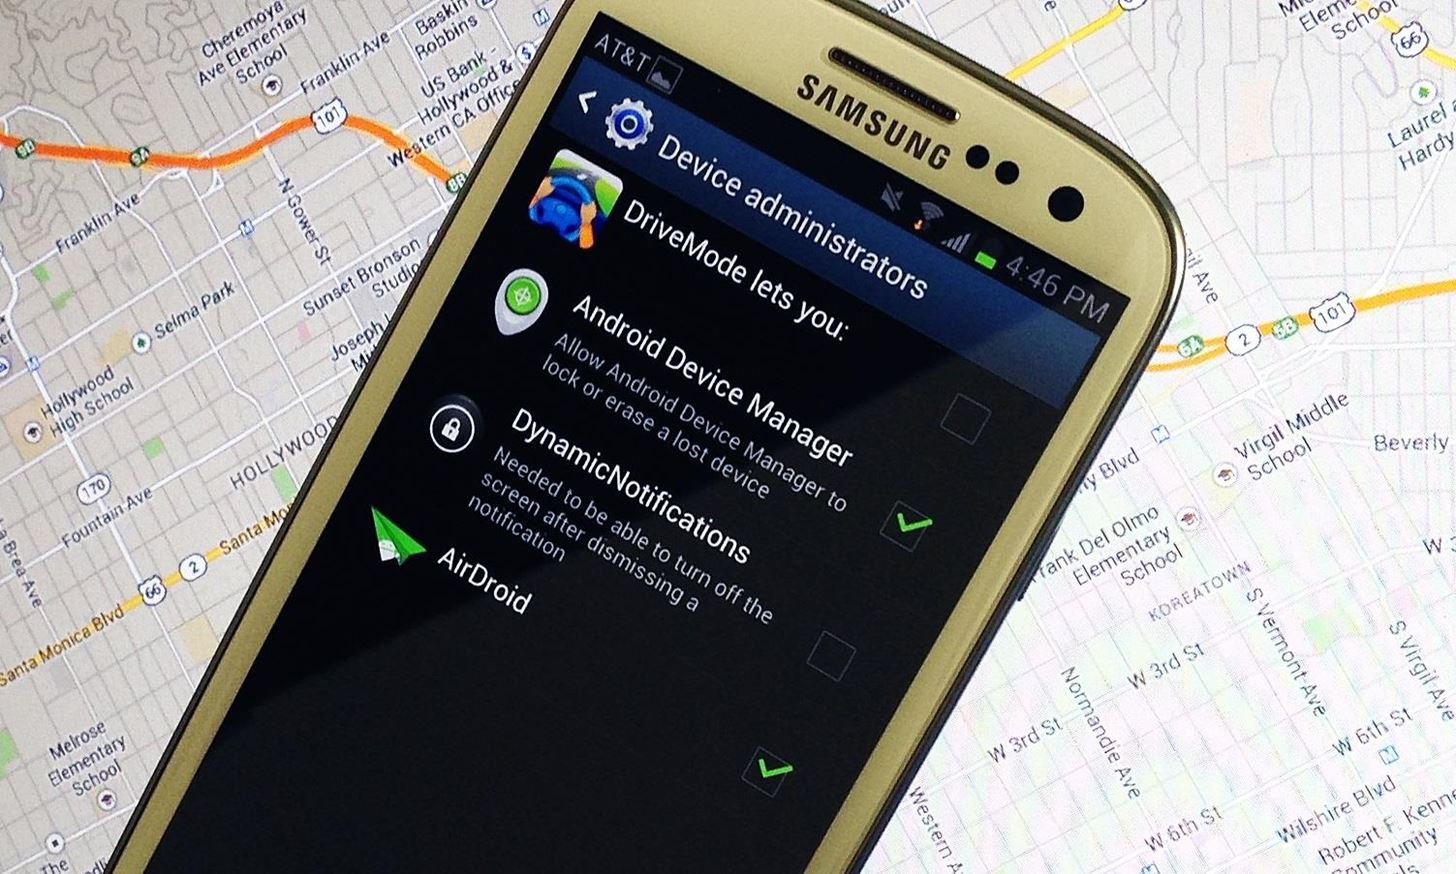 Unlock Samsung Galaxy Through Android Device Manager